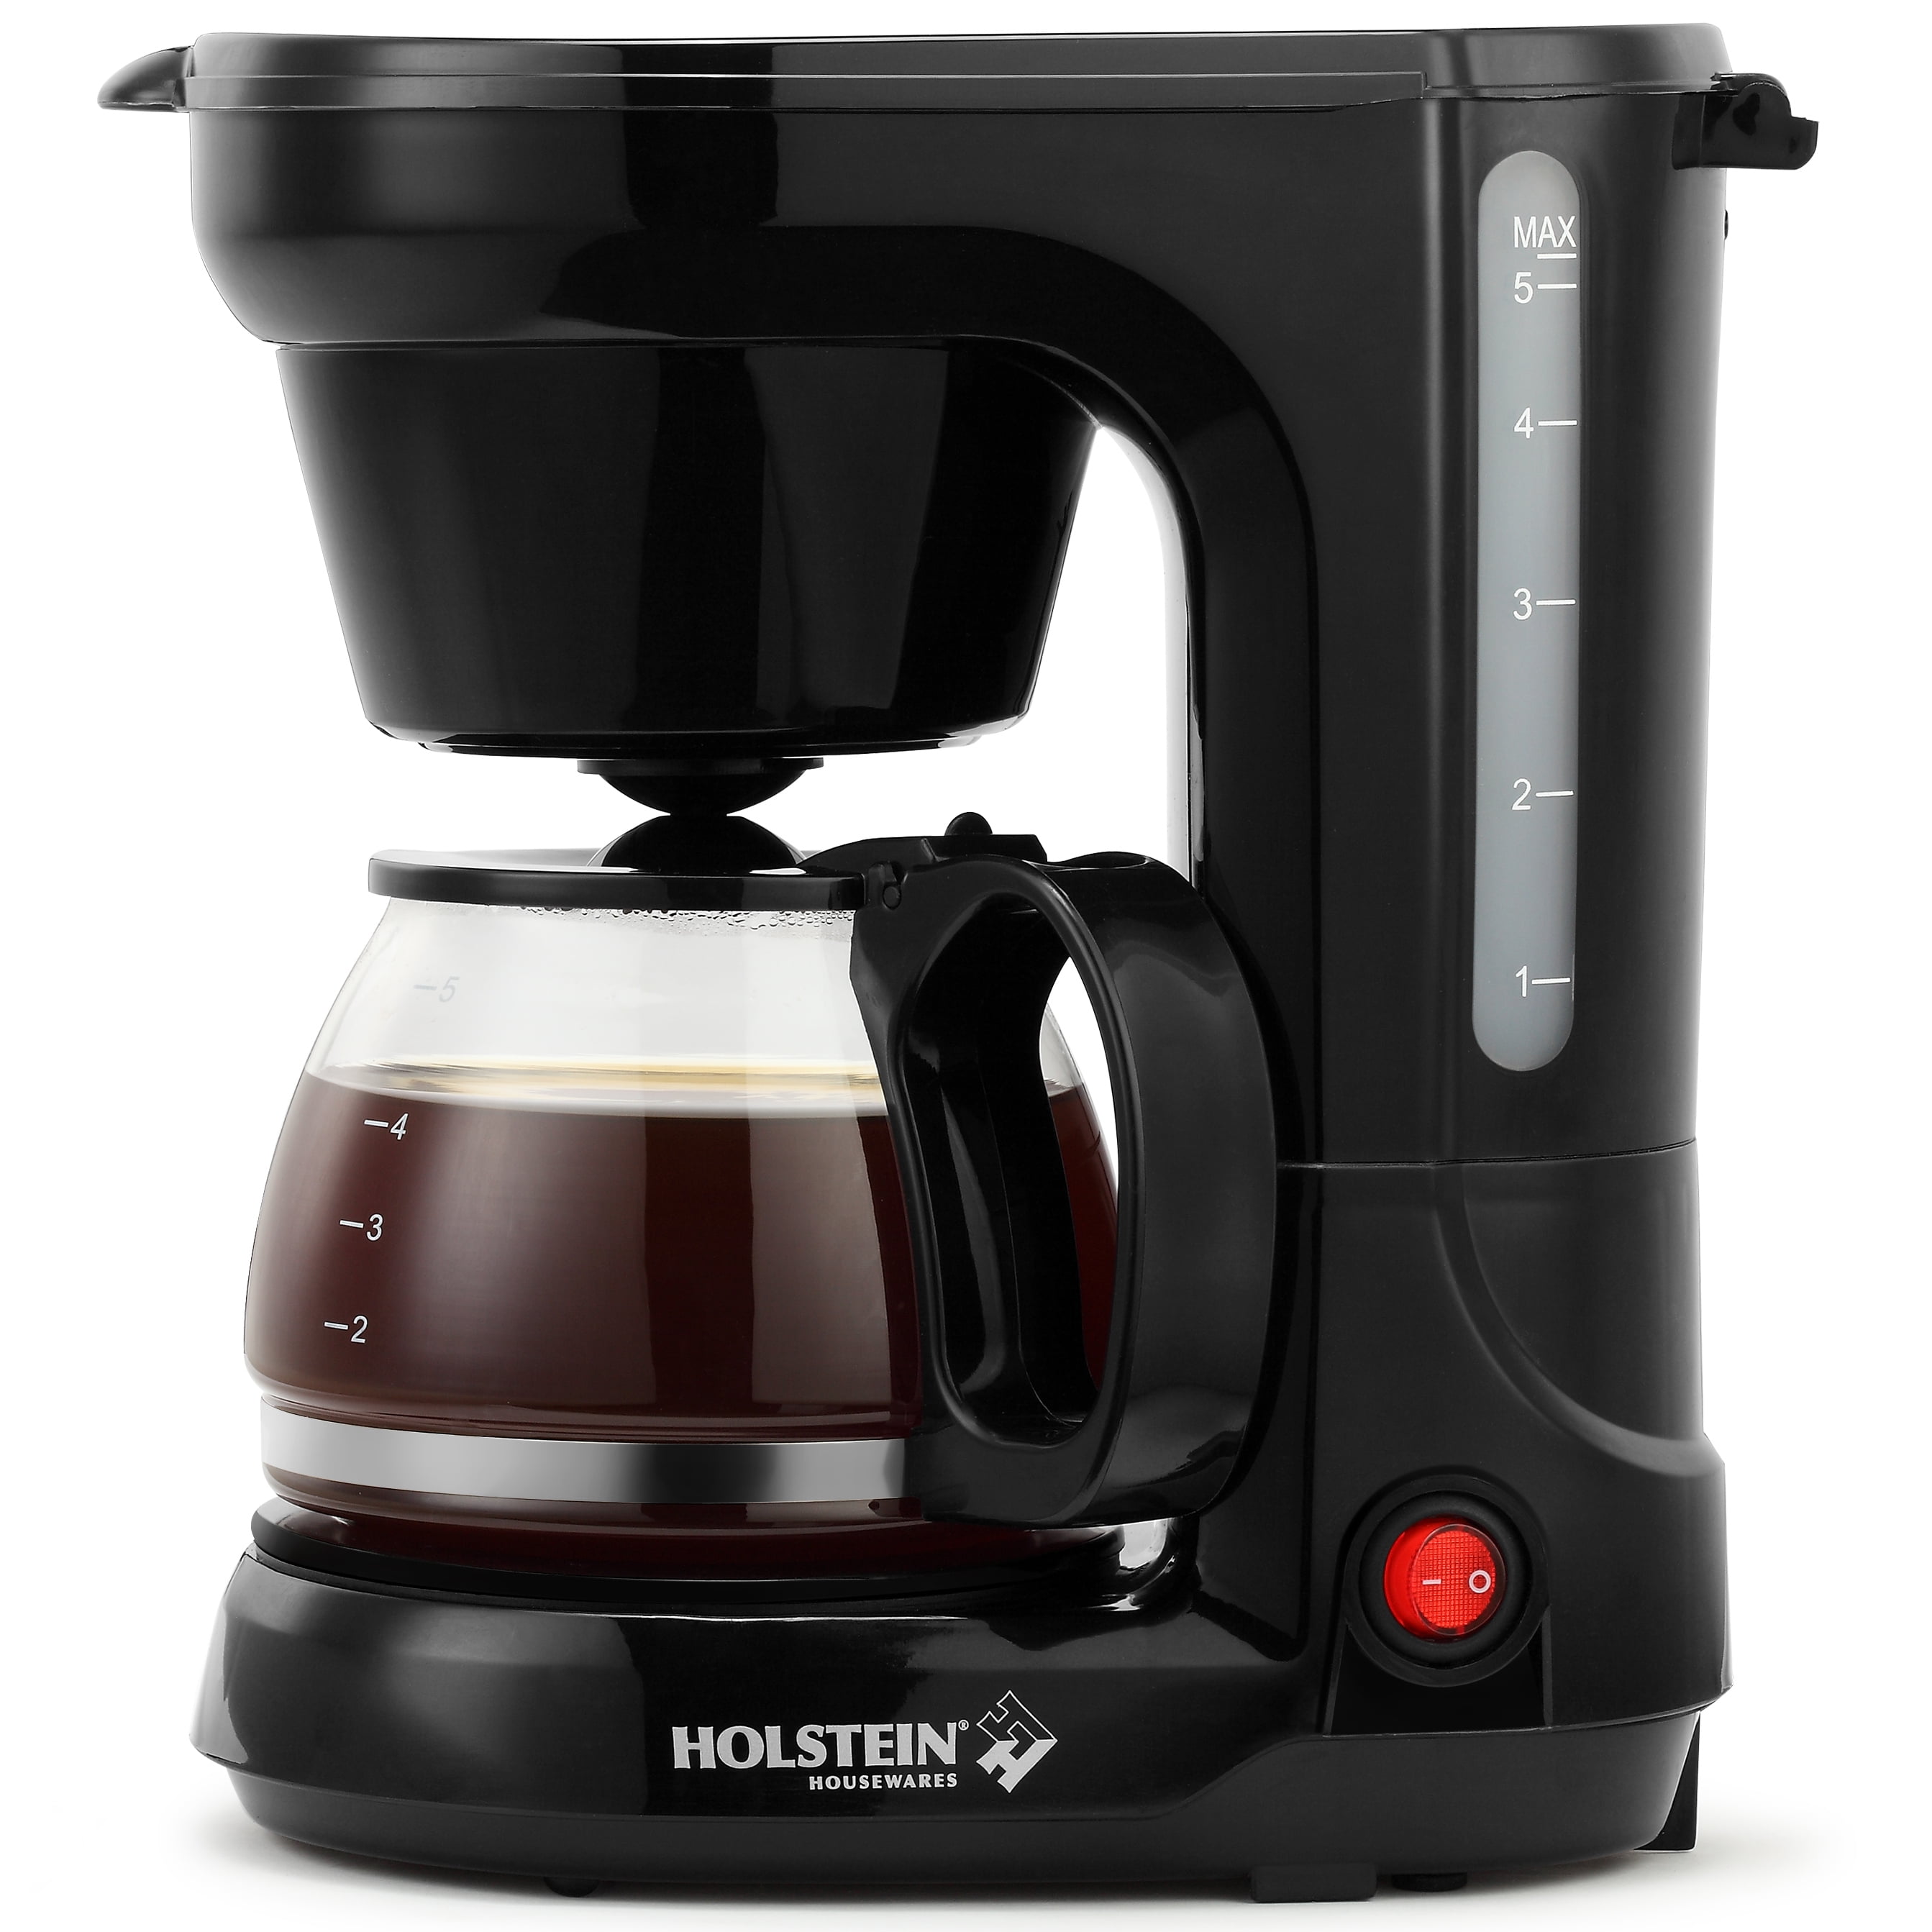 Holstein Housewares 5-CUP Coffee Maker - Space-Saving Design, Auto Pause  and Serve, and Removable Filter Basket for Fresh and Rich-Tasting Coffee -  RED 